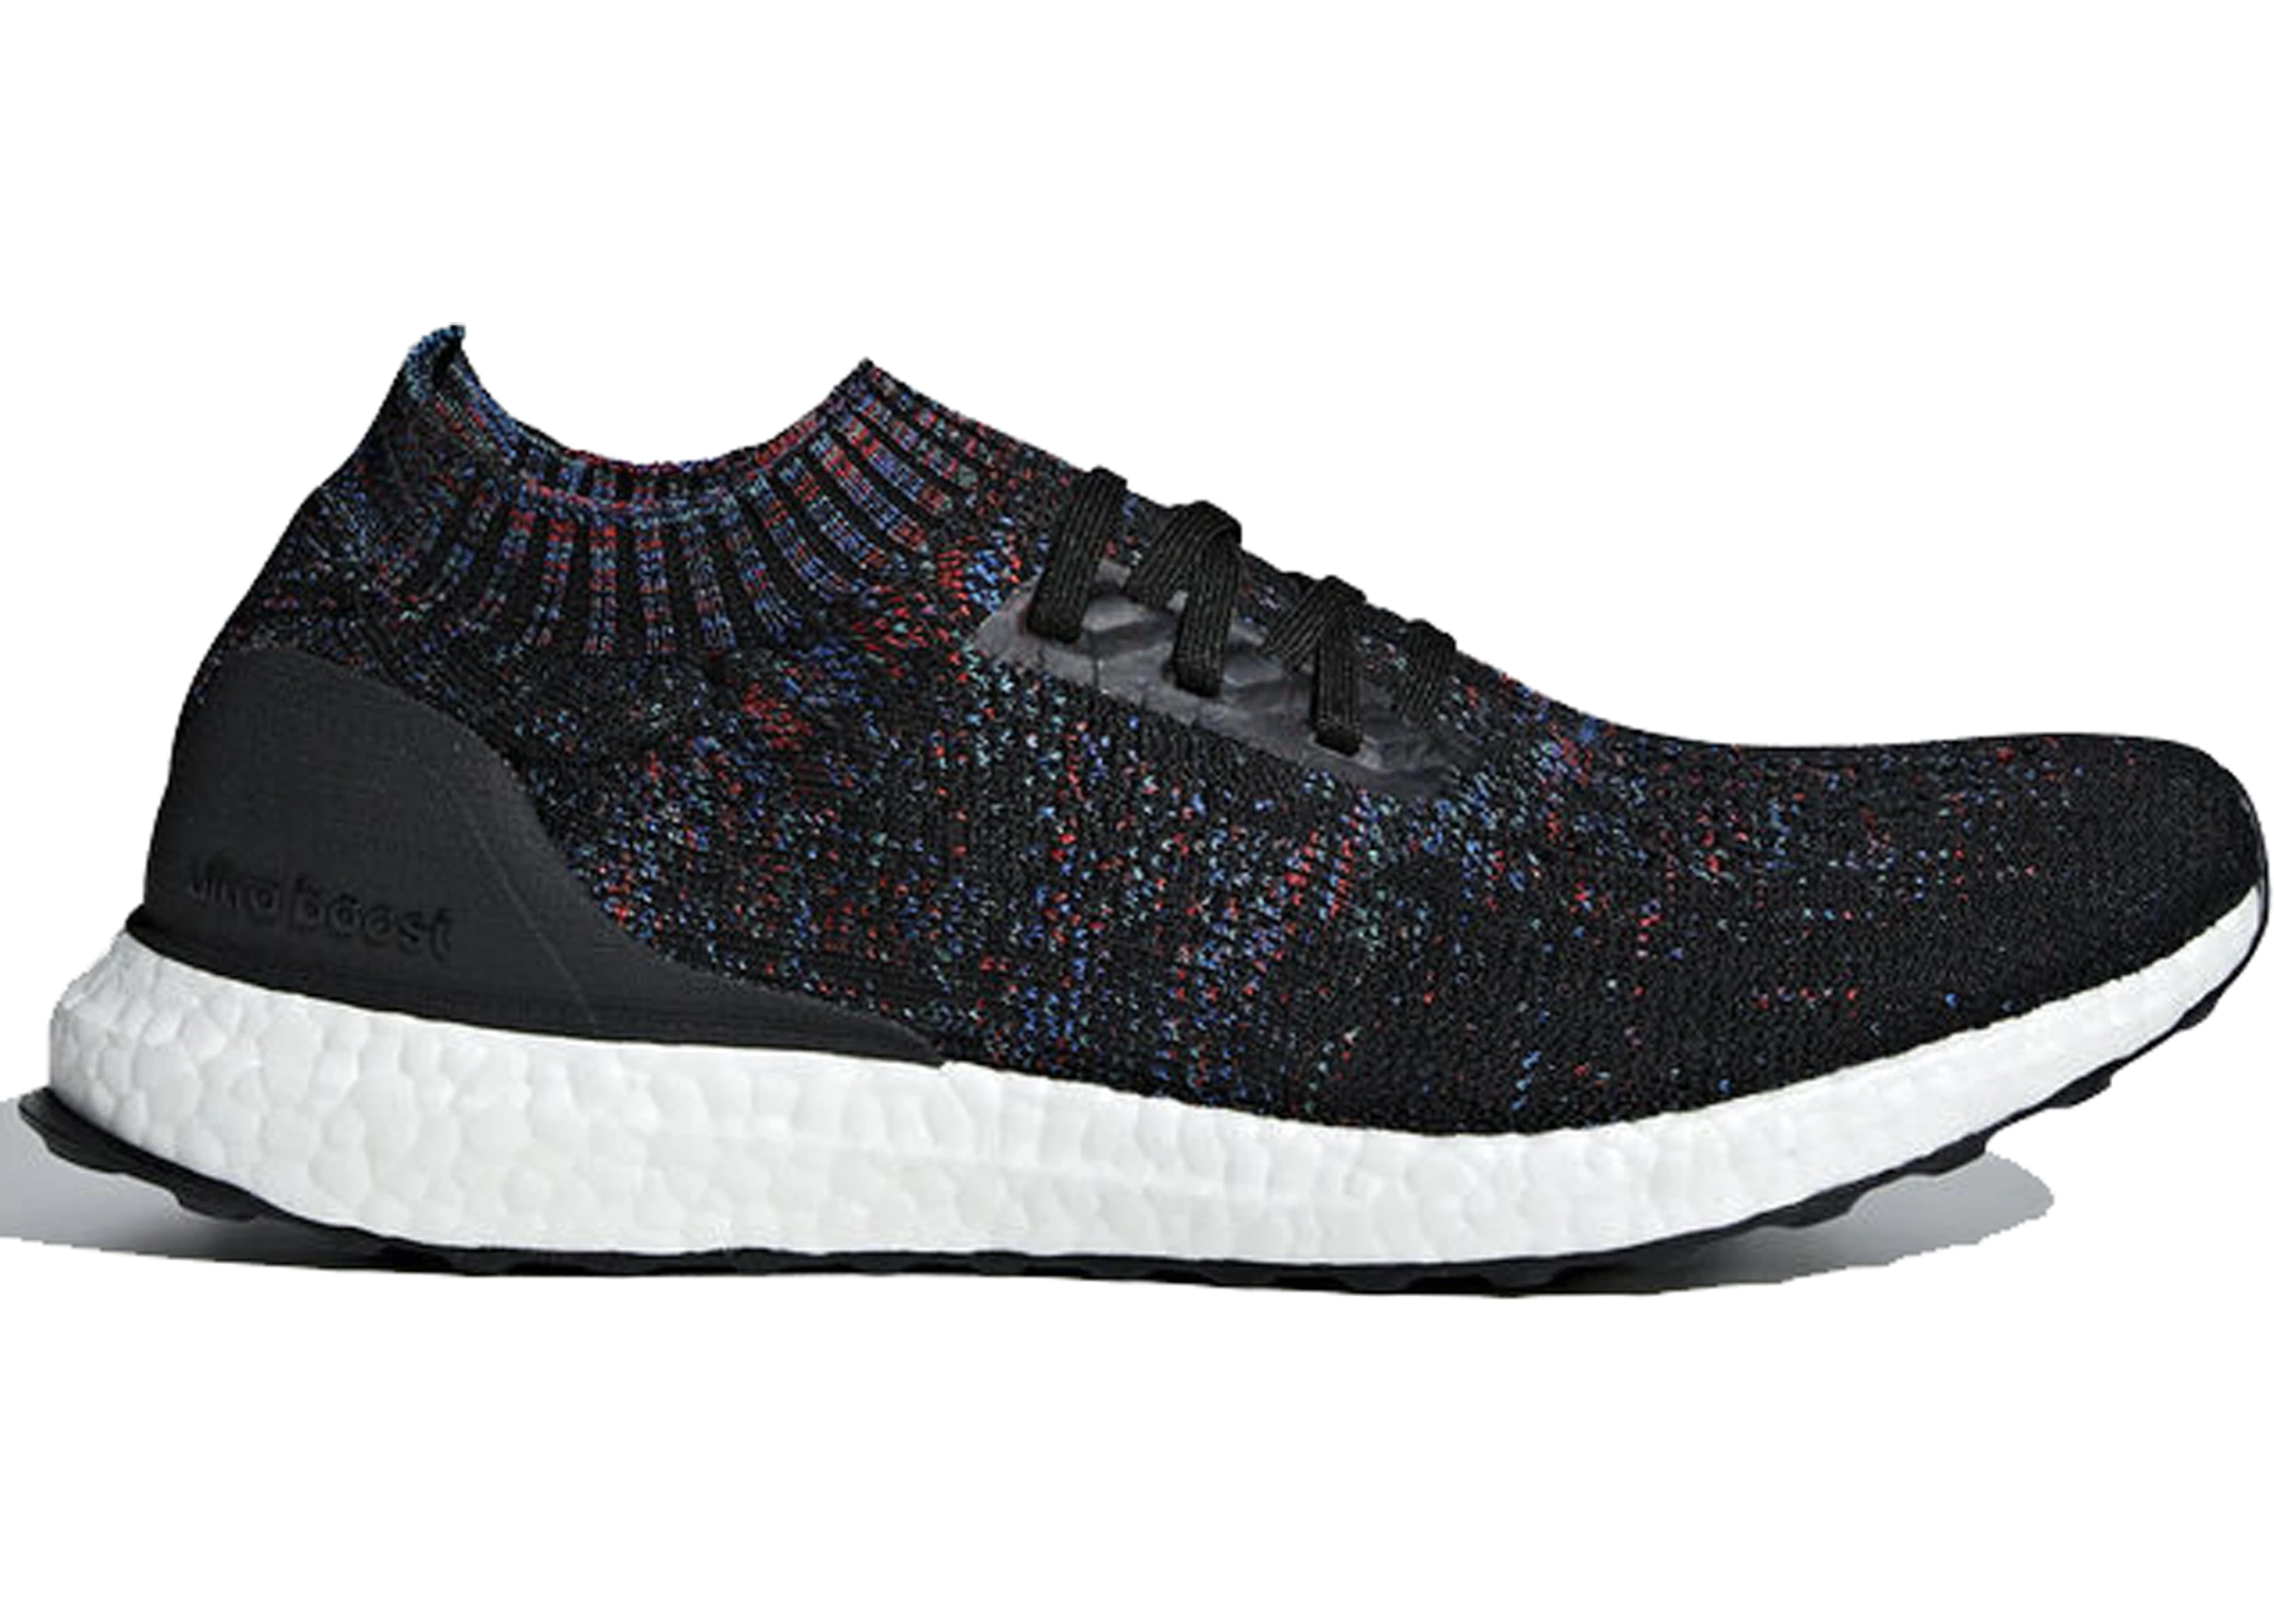 Buy adidas Ultra Boost Uncaged Shoes & New Sneakers - StockX